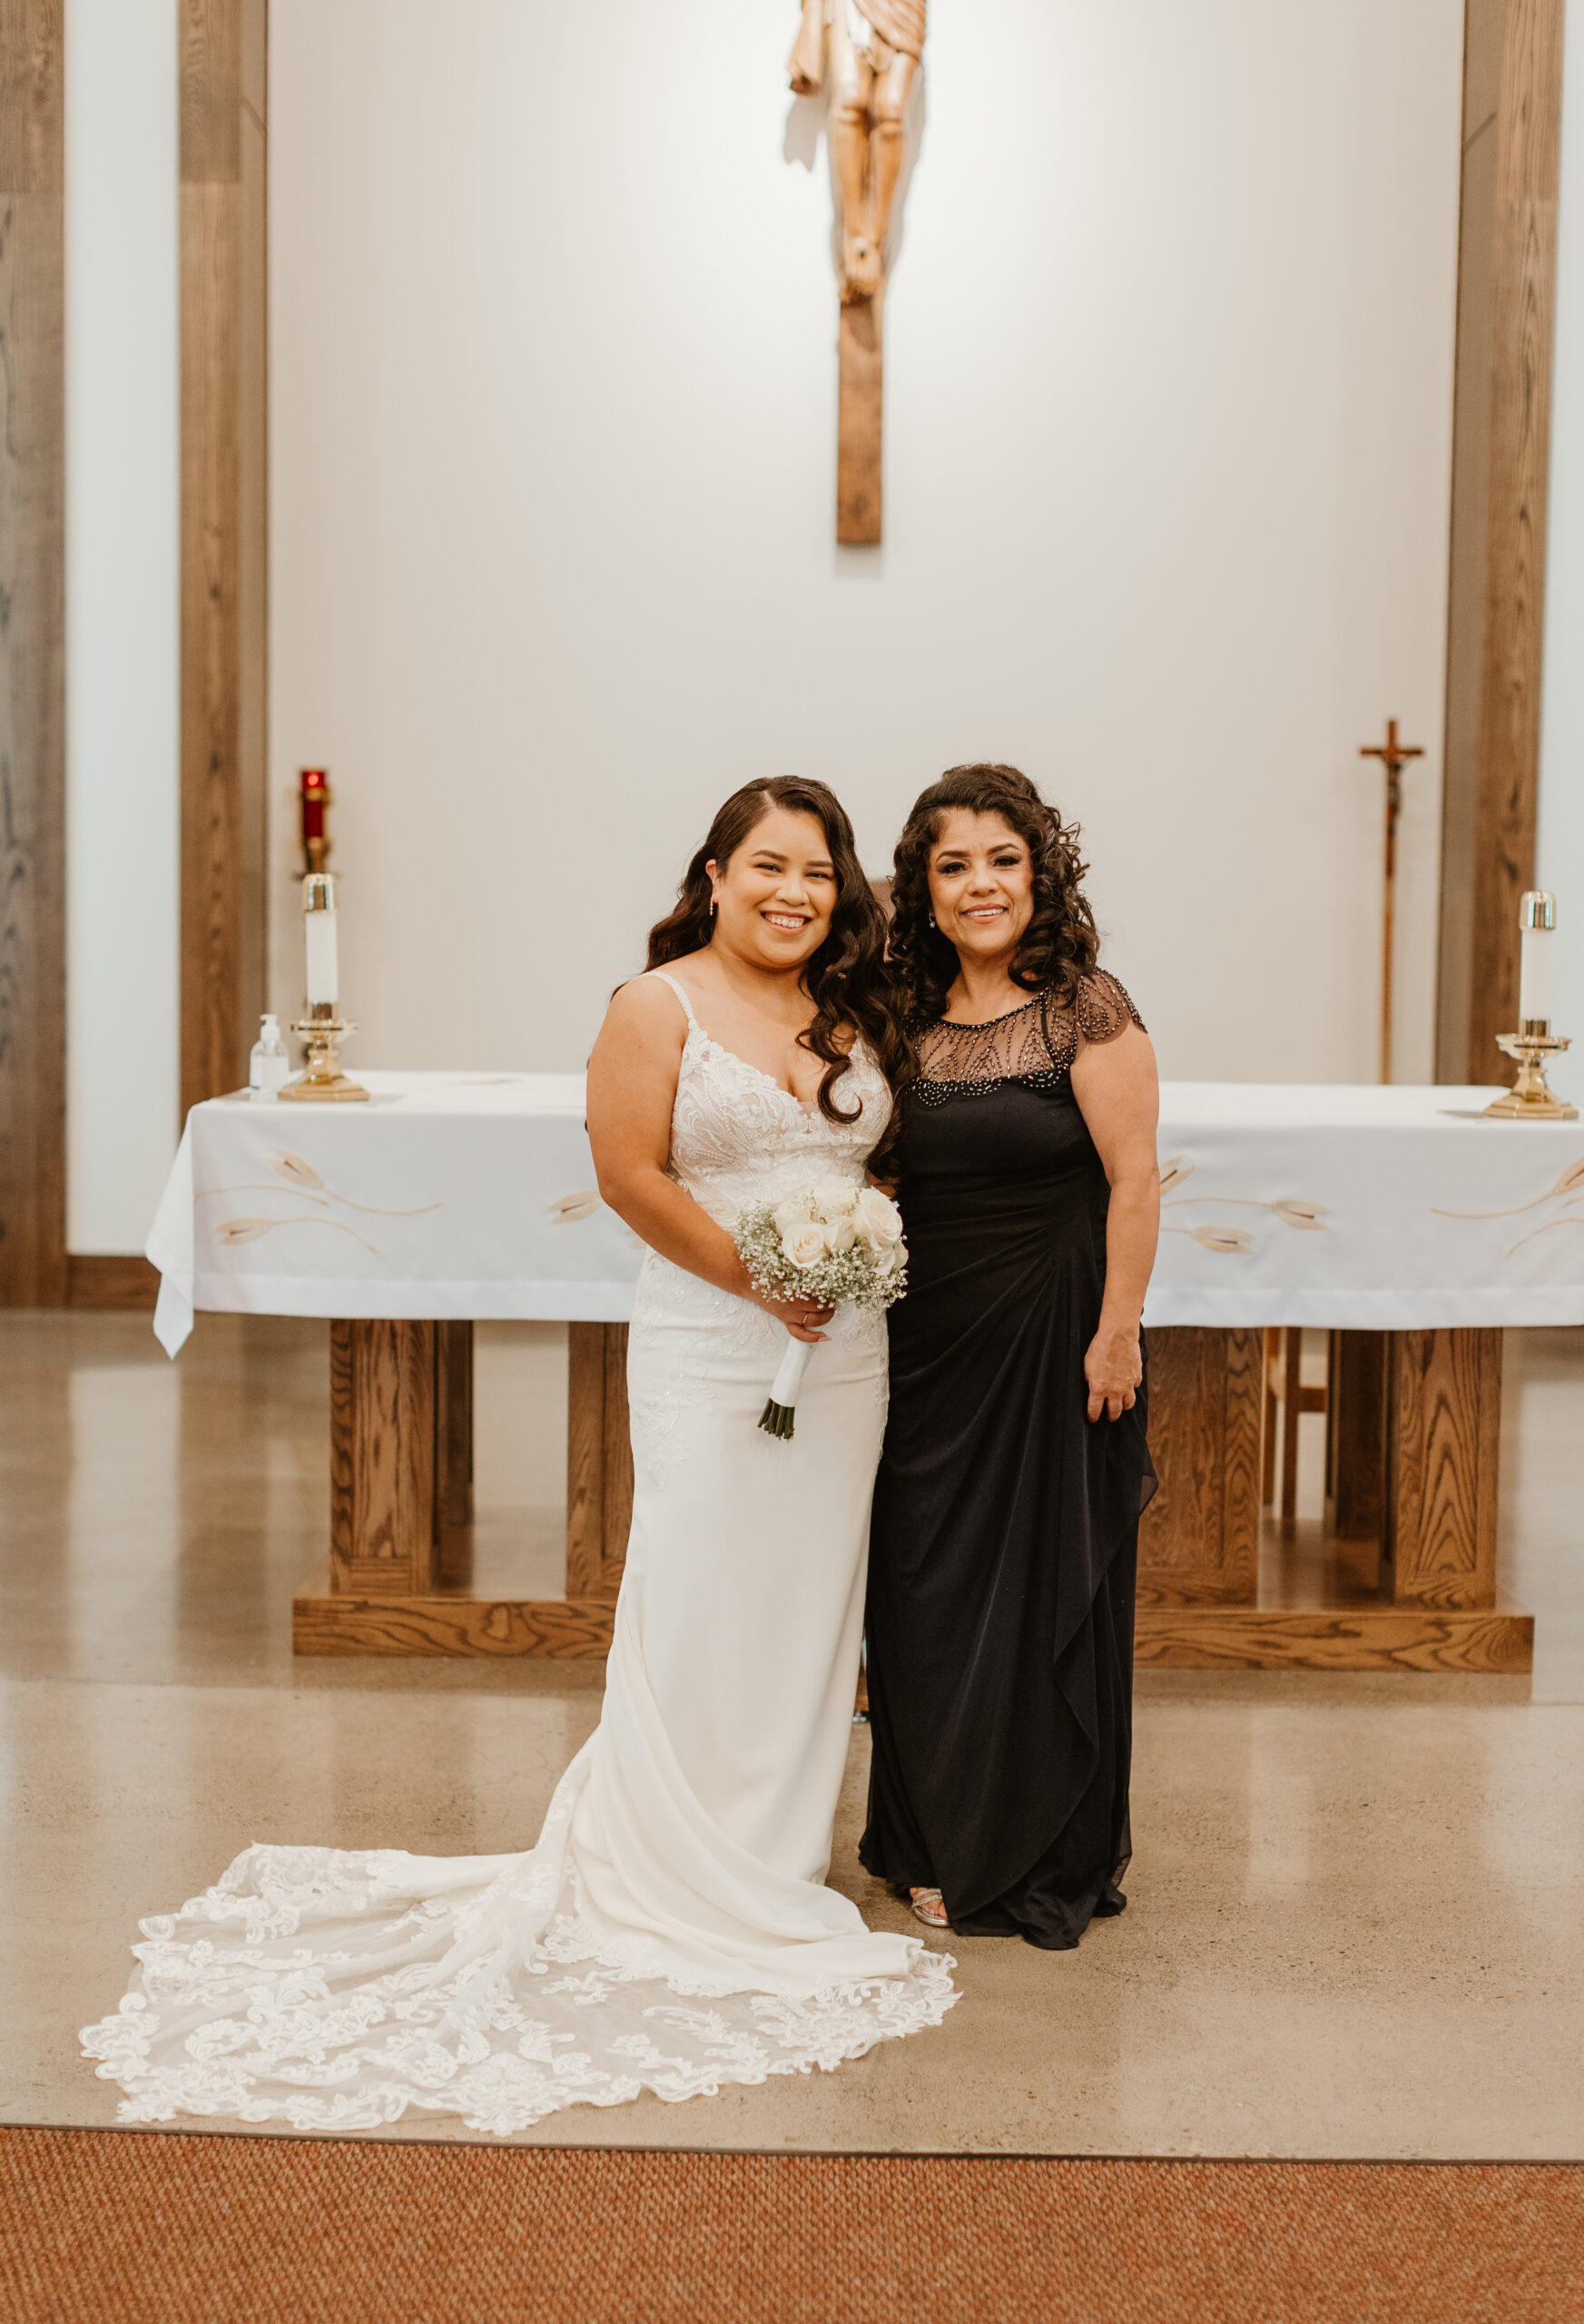 bride with her mother in law